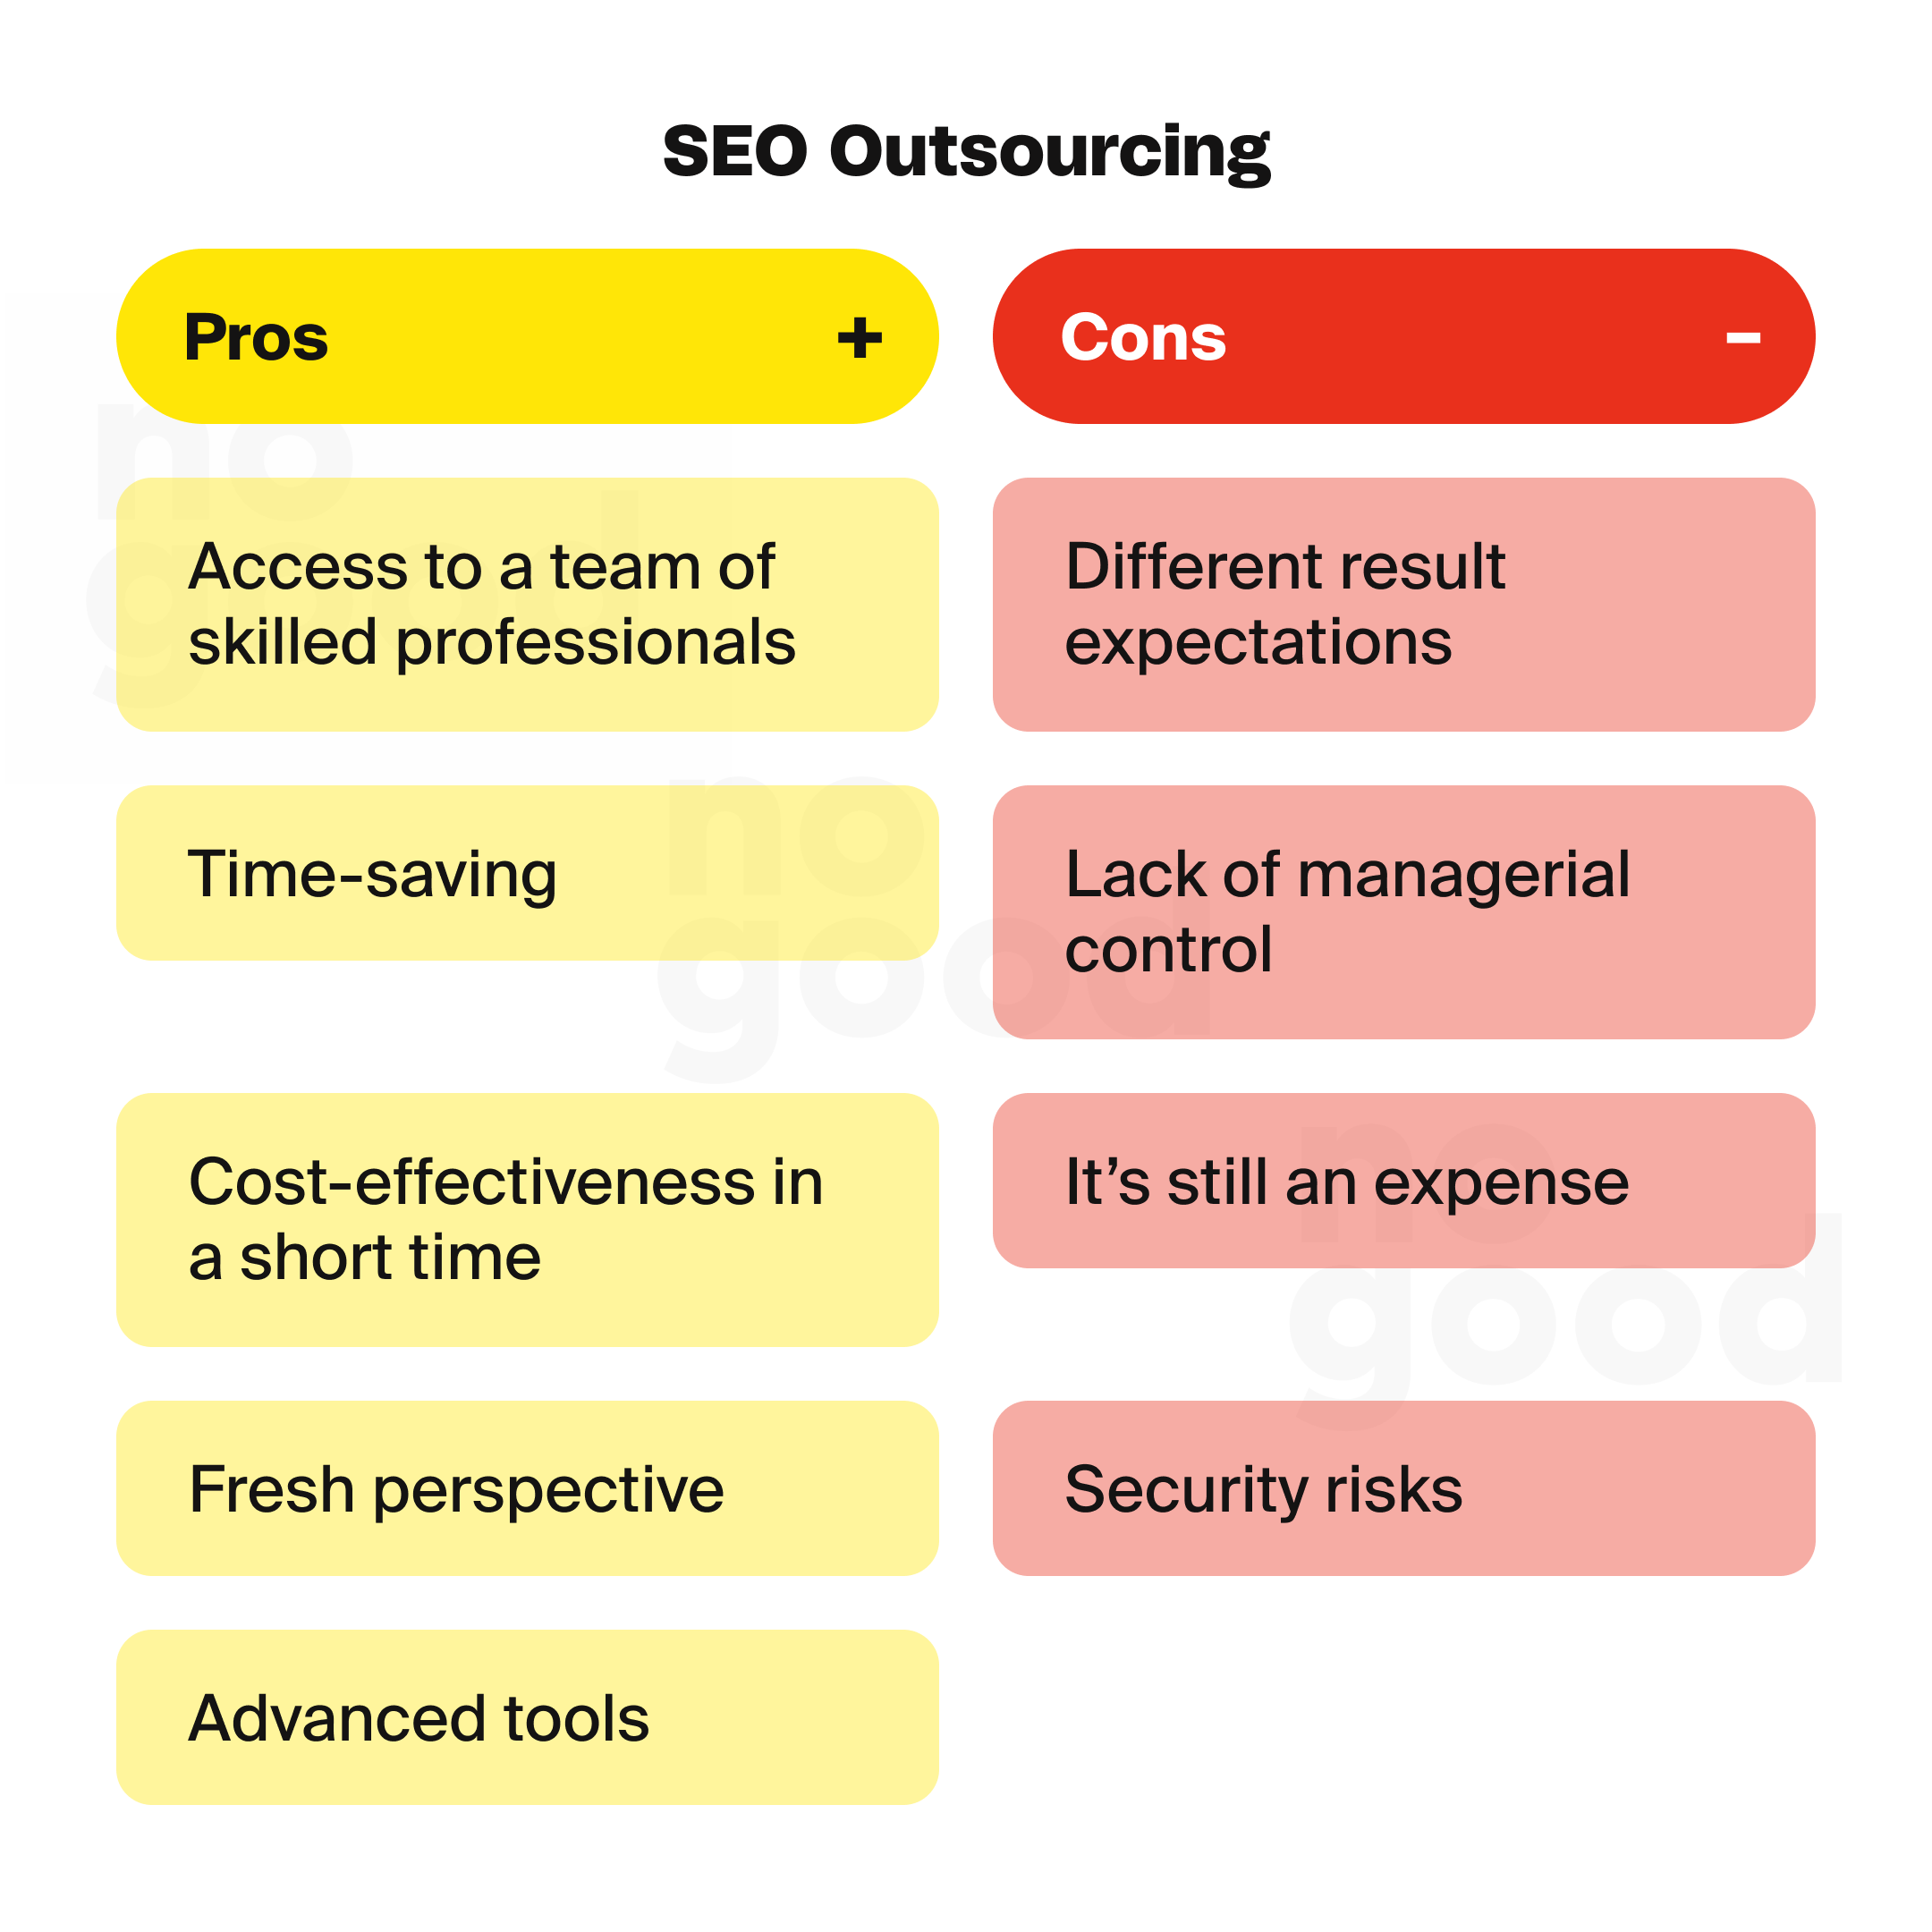 SEO outsourcing pros and cons